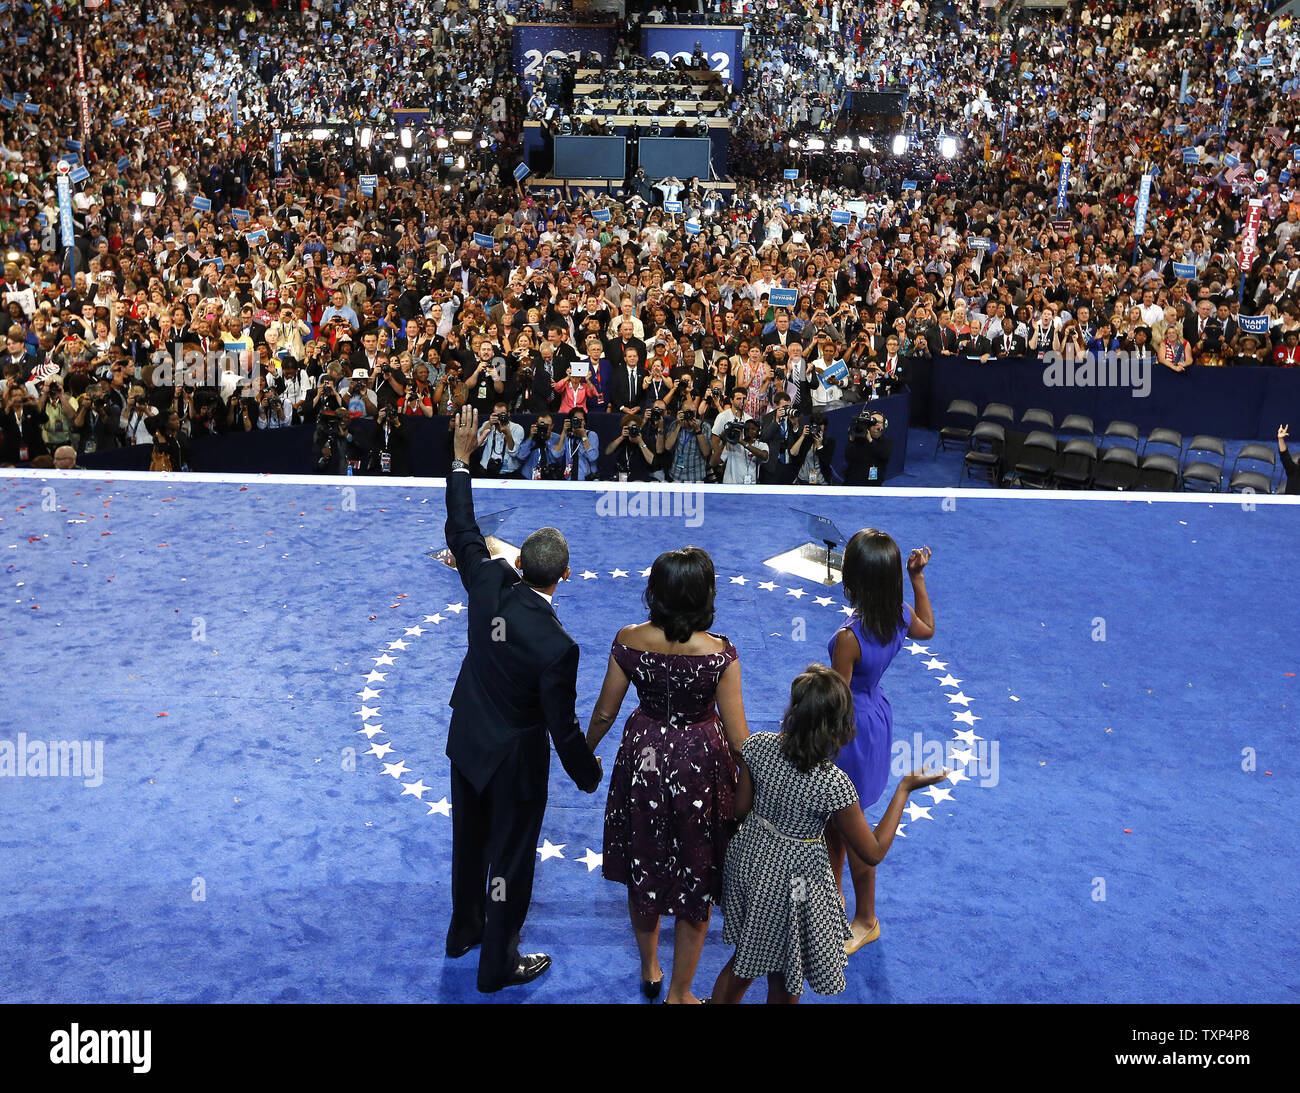 President Barack Obama and his family wave to the convention after giving his acceptance speech during the 2012 Democratic National Convention at the Time Warner Cable Arena in Charlotte, North Carolina on September 6, 2012.          UPI/Scott Andrews   POOL Stock Photo